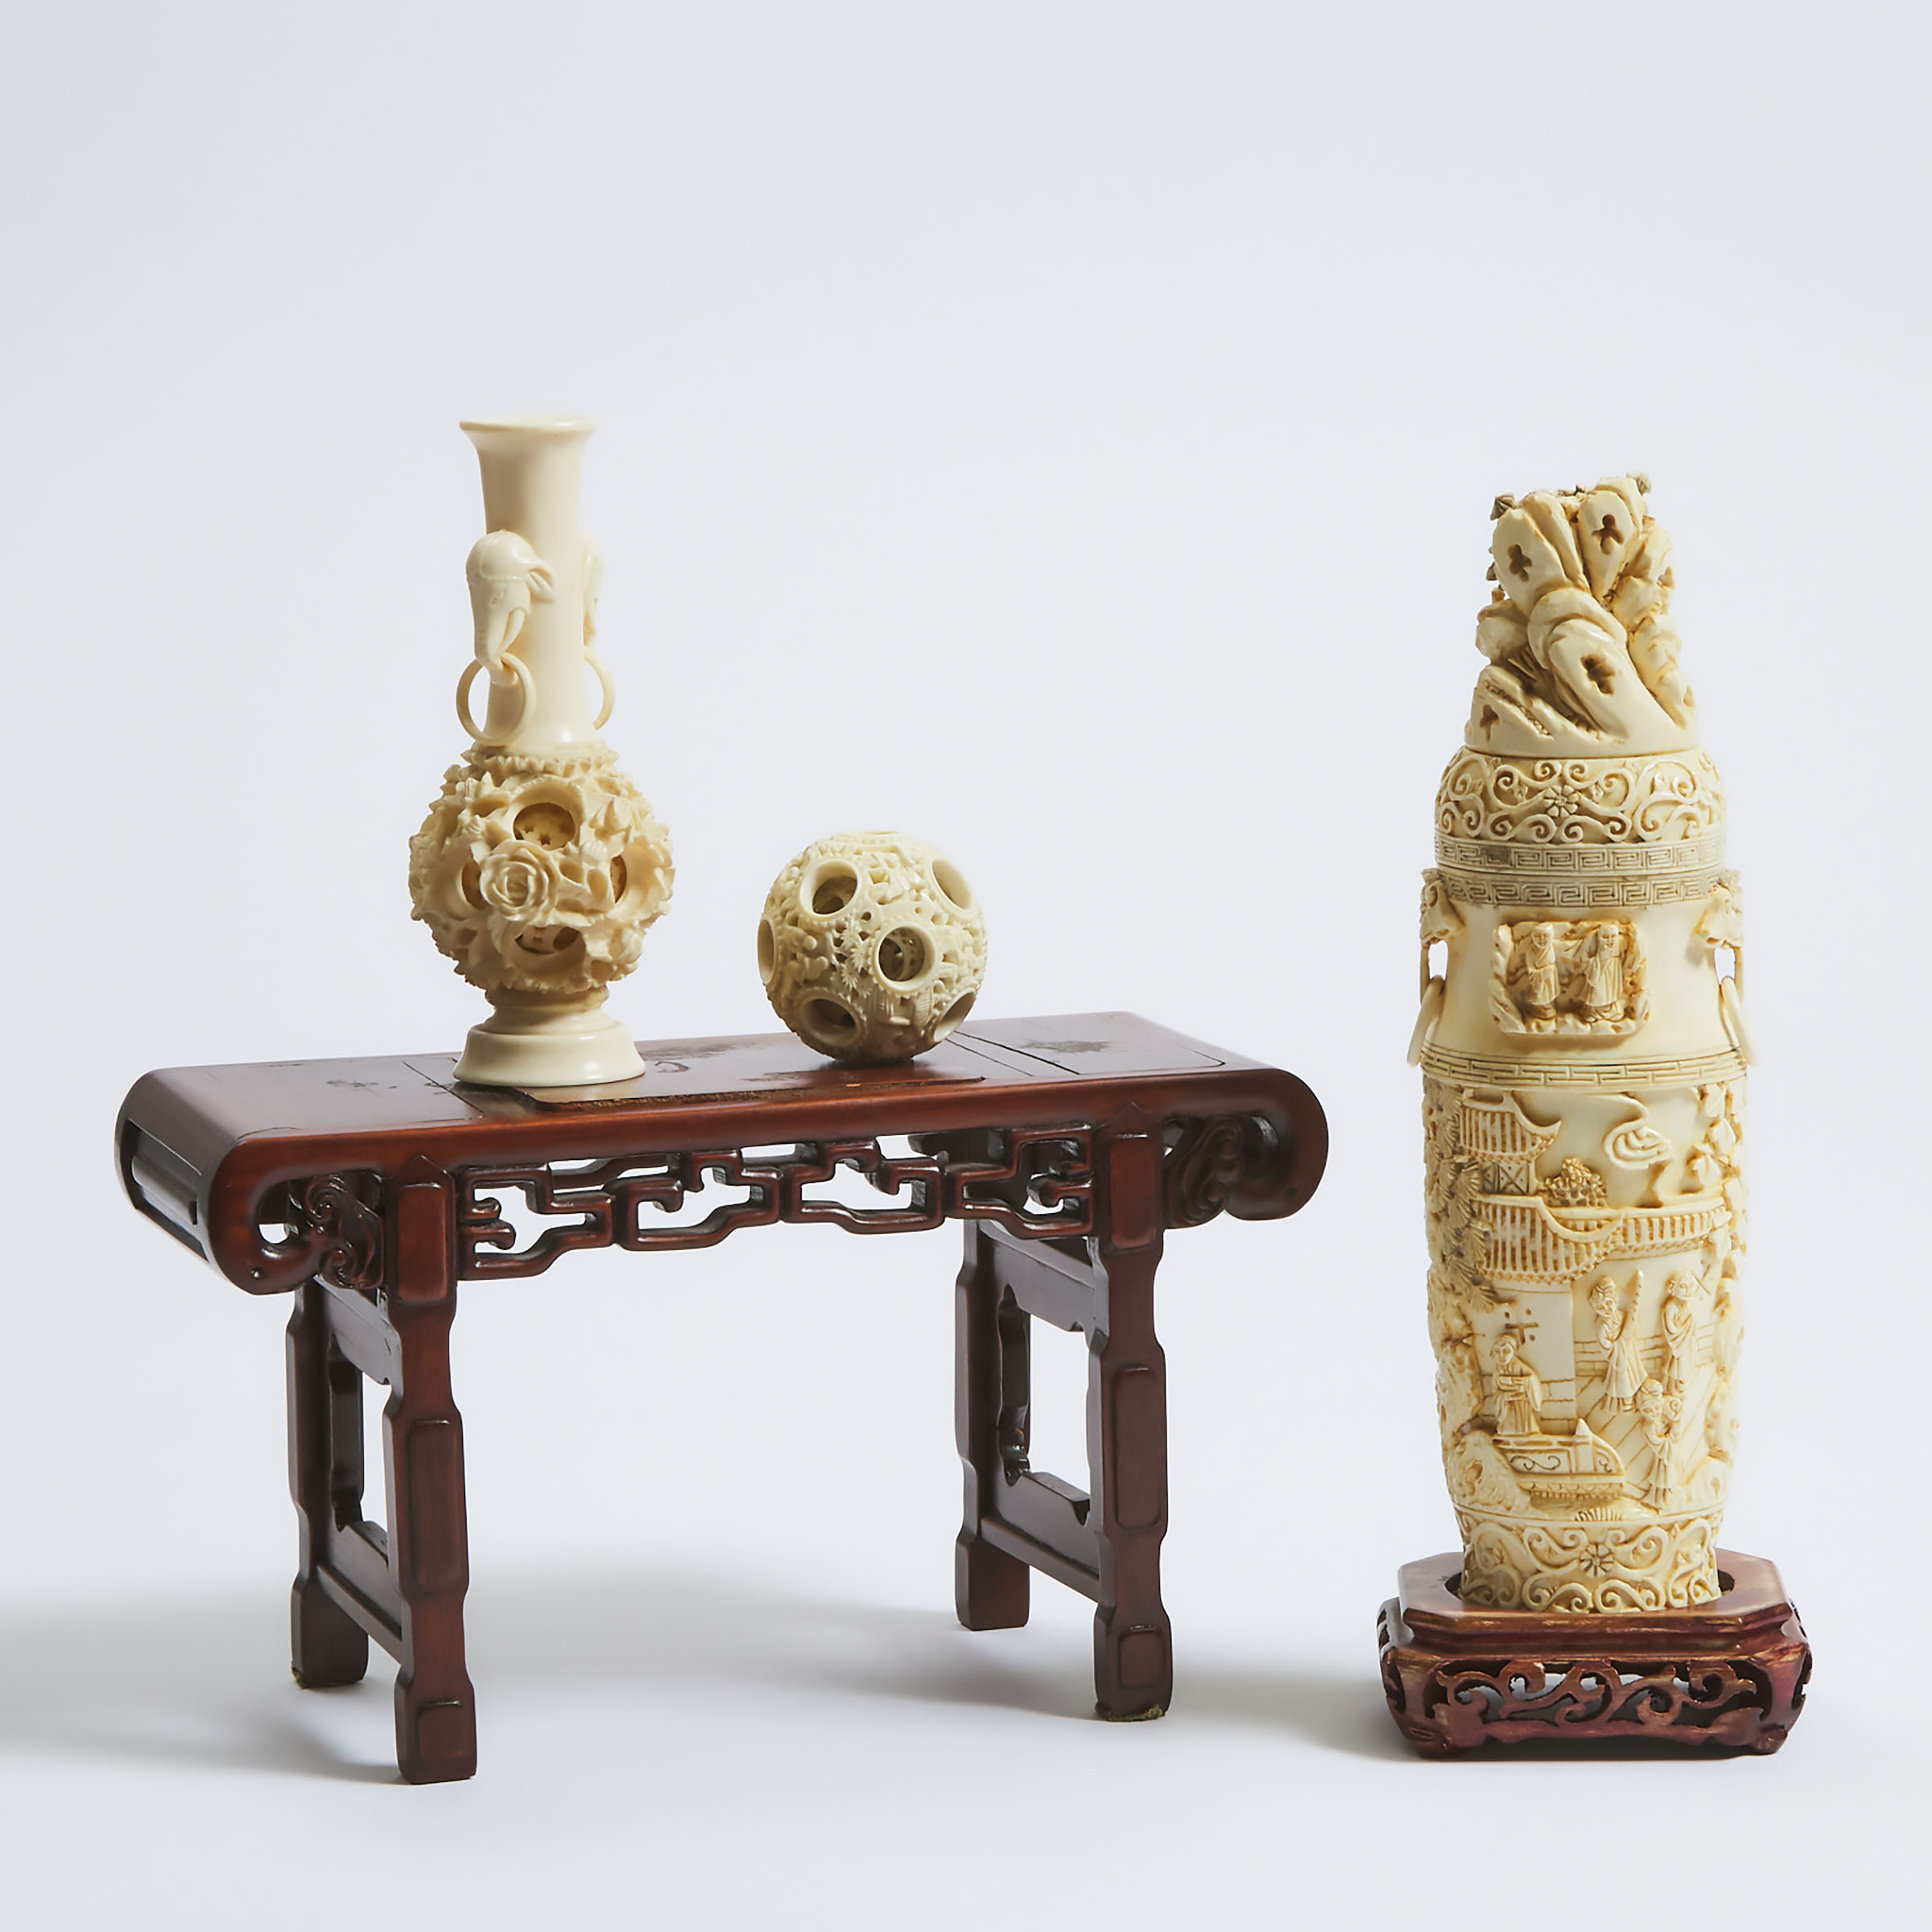 A Chinese Ivory Vase and Cover, Together With a Puzzle Ball Vase, Puzzle Ball, and Miniature Wood Table, Early to Mid 20th Century